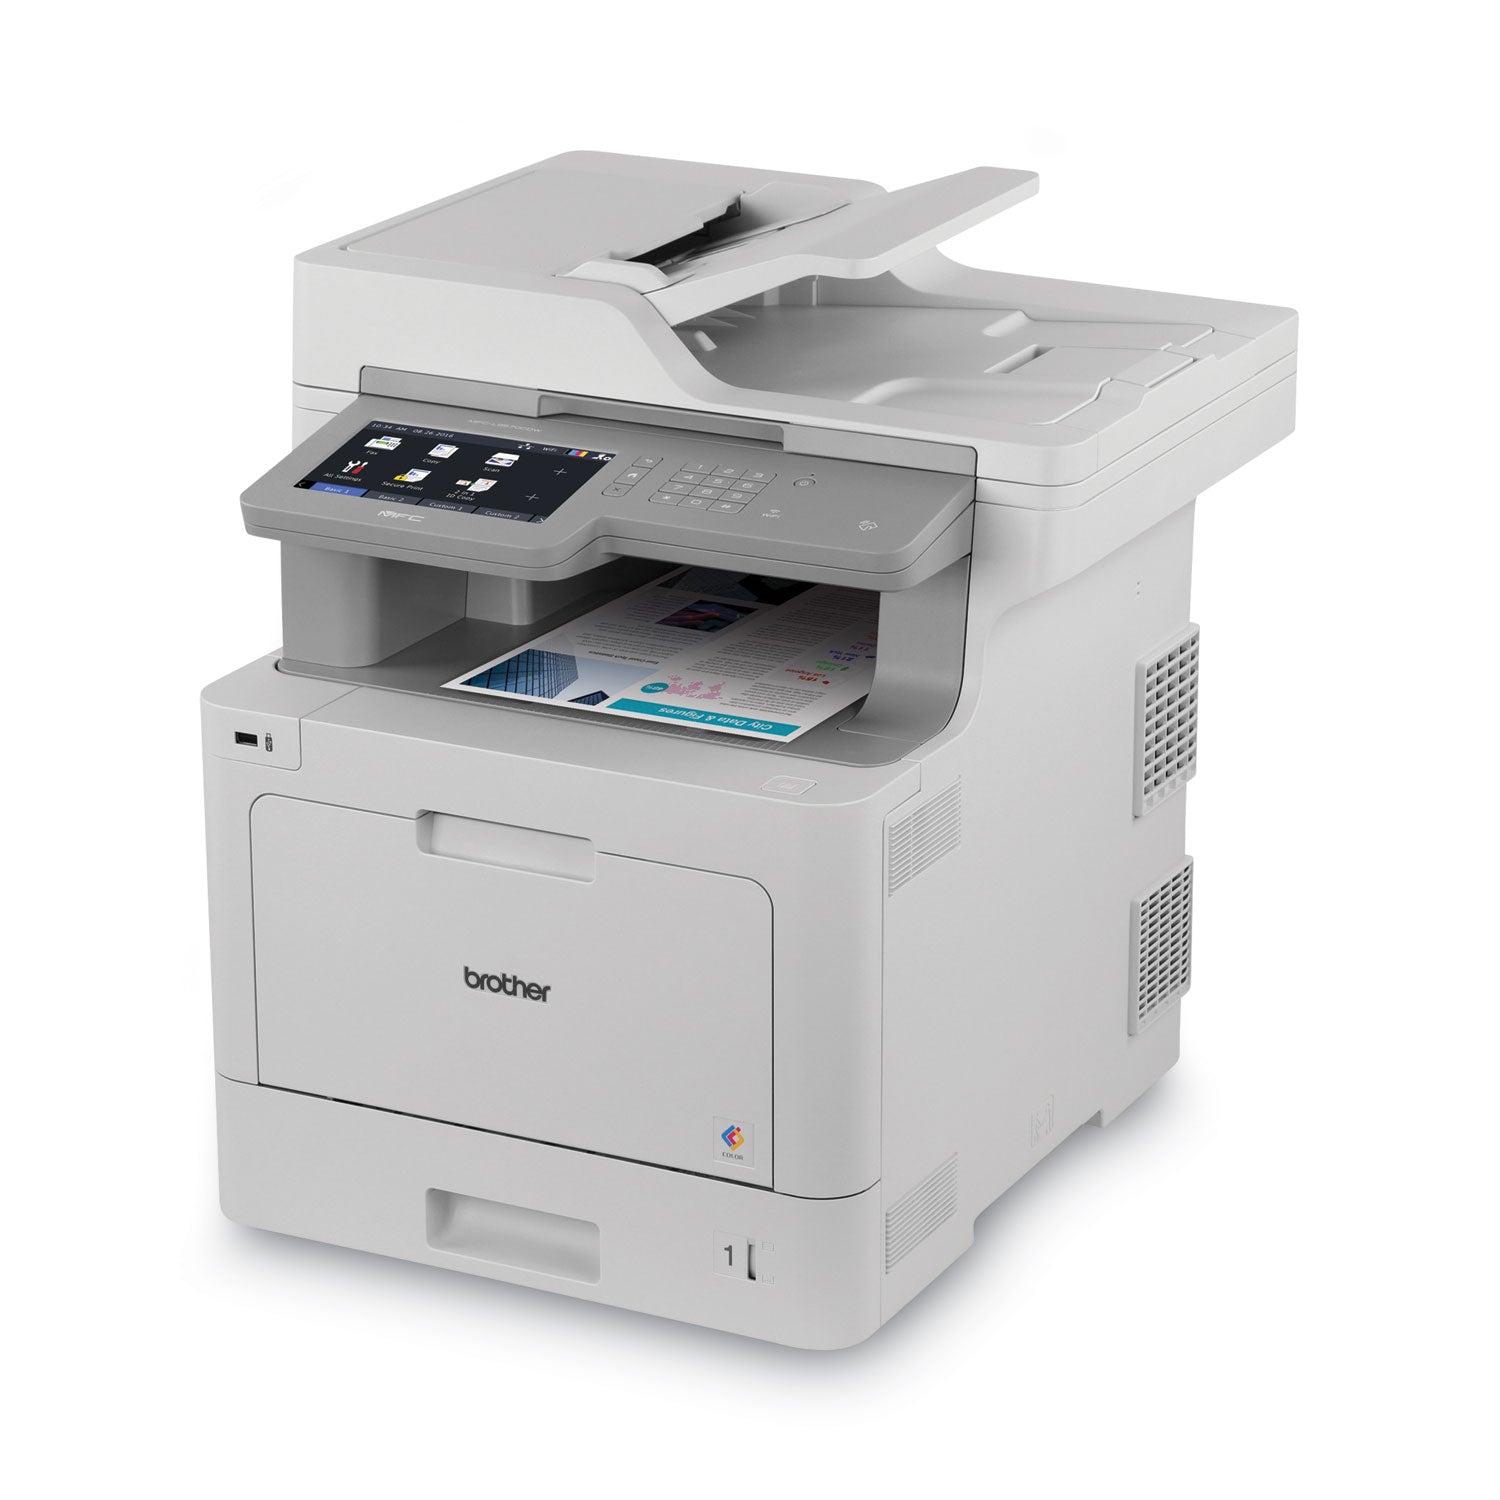 Brother Business Color Laser All-in-One MFC-L9570CDW - Duplex Printing - Wireless LAN - Copier/Fax/Printer/Scanner - 33 ppm Mono/33 ppm Color - 2400 x 600 dpi Print - 7" LCD Touchscreen - Gigabit Ethernet - USB 2.0 - 2